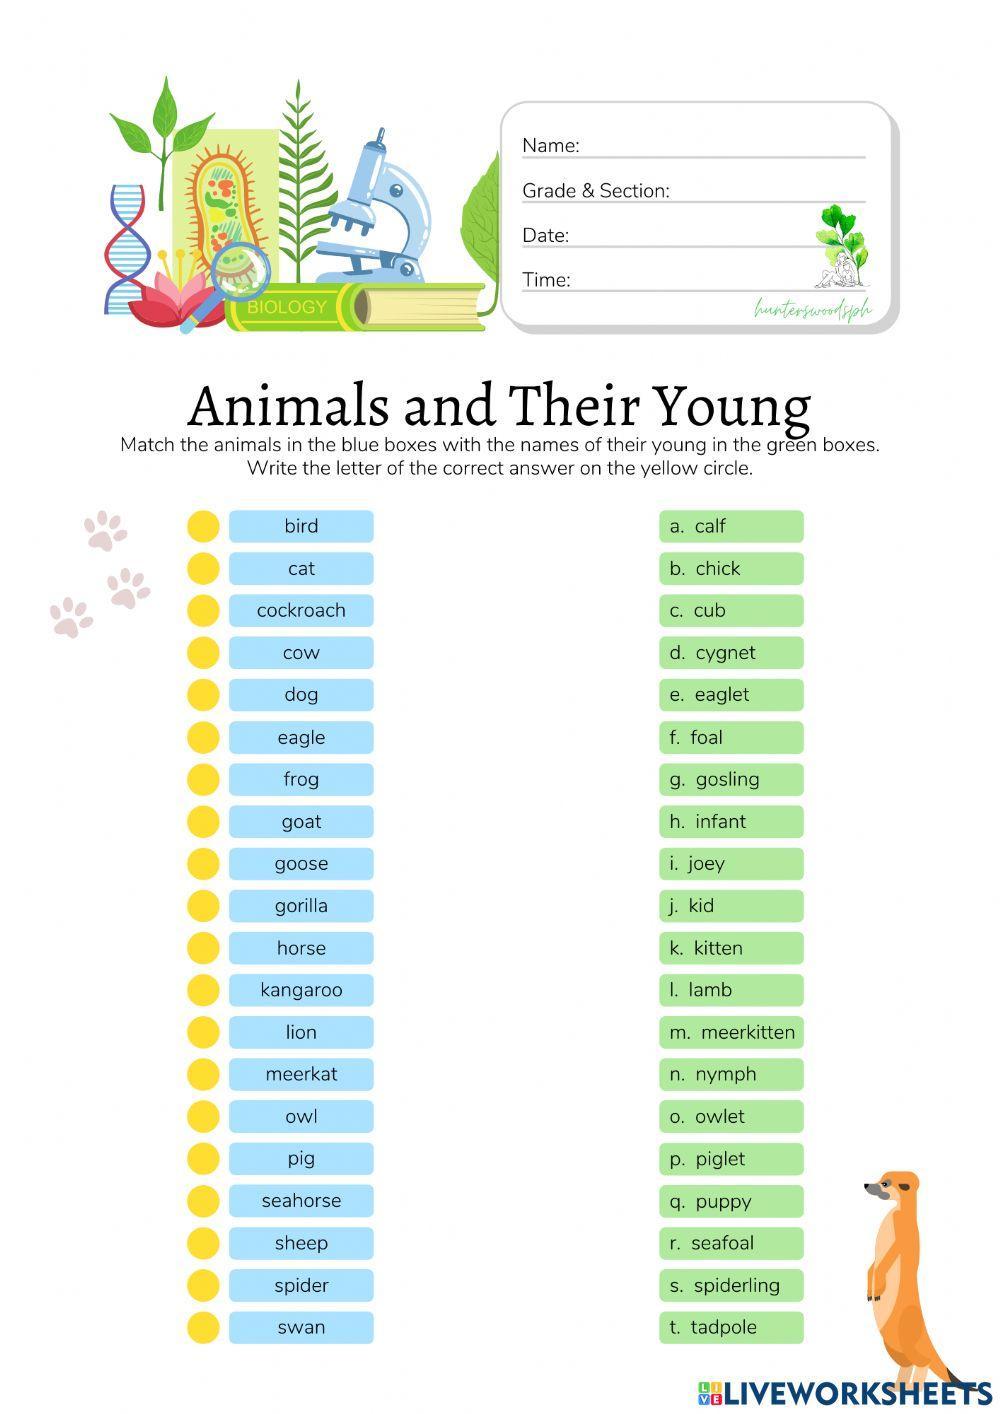 Animals and Their Young - HuntersWoodsPH Biology